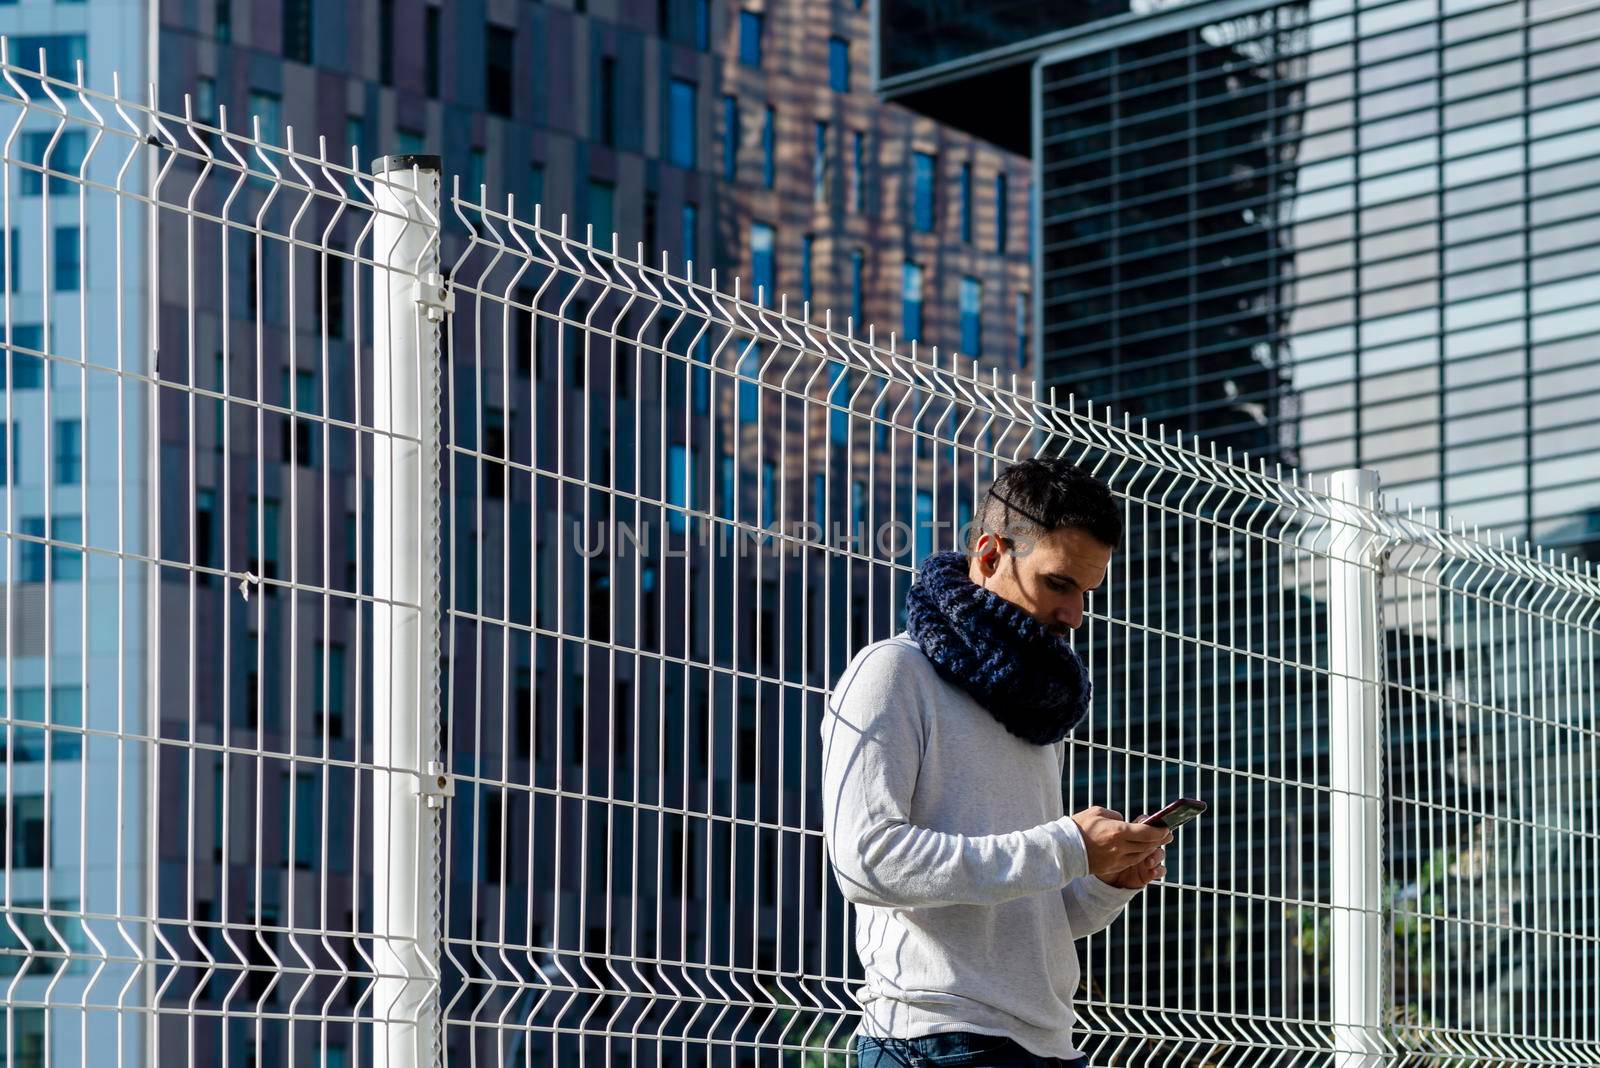 Young male wearing scarf leaning on metallic fence while using smartphone outdoors